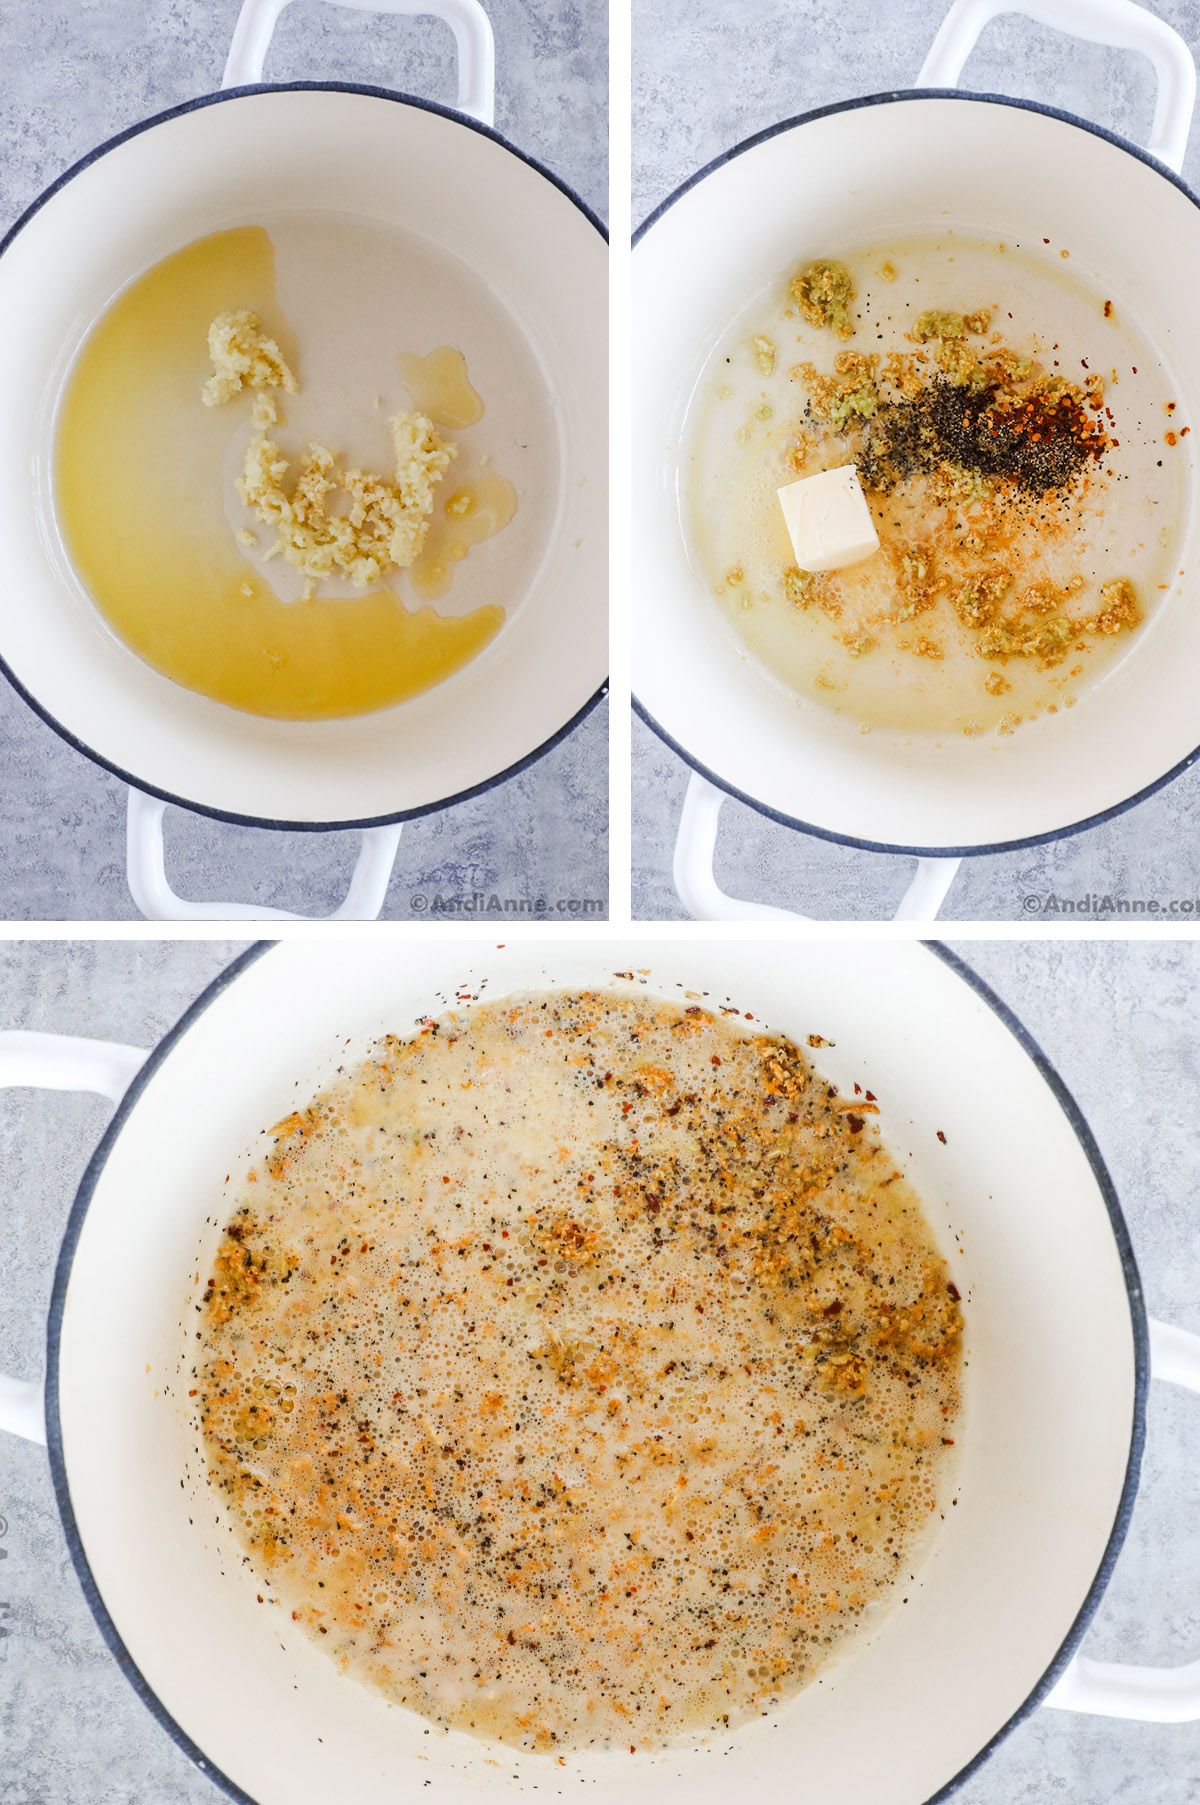 Three images of a pot. First oil and minced garlic. Second butter and spices added to minced garlic. Third is a melted butter with the spices and garlic.